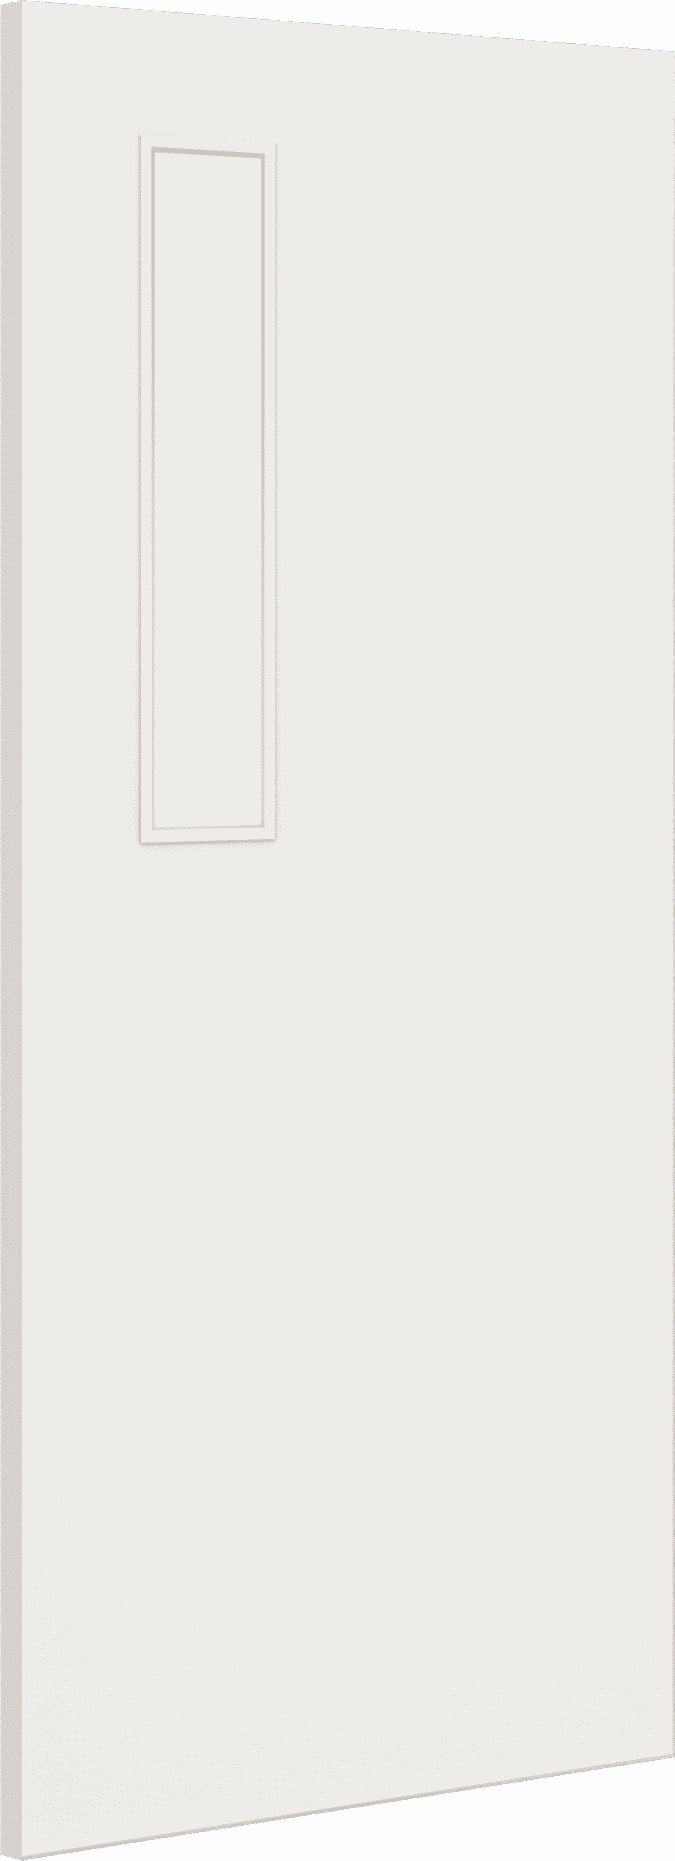 2040mm x 826mm x 44mm Architectural Paint Grade White 08 Frosted Glazed Fire Door Blank